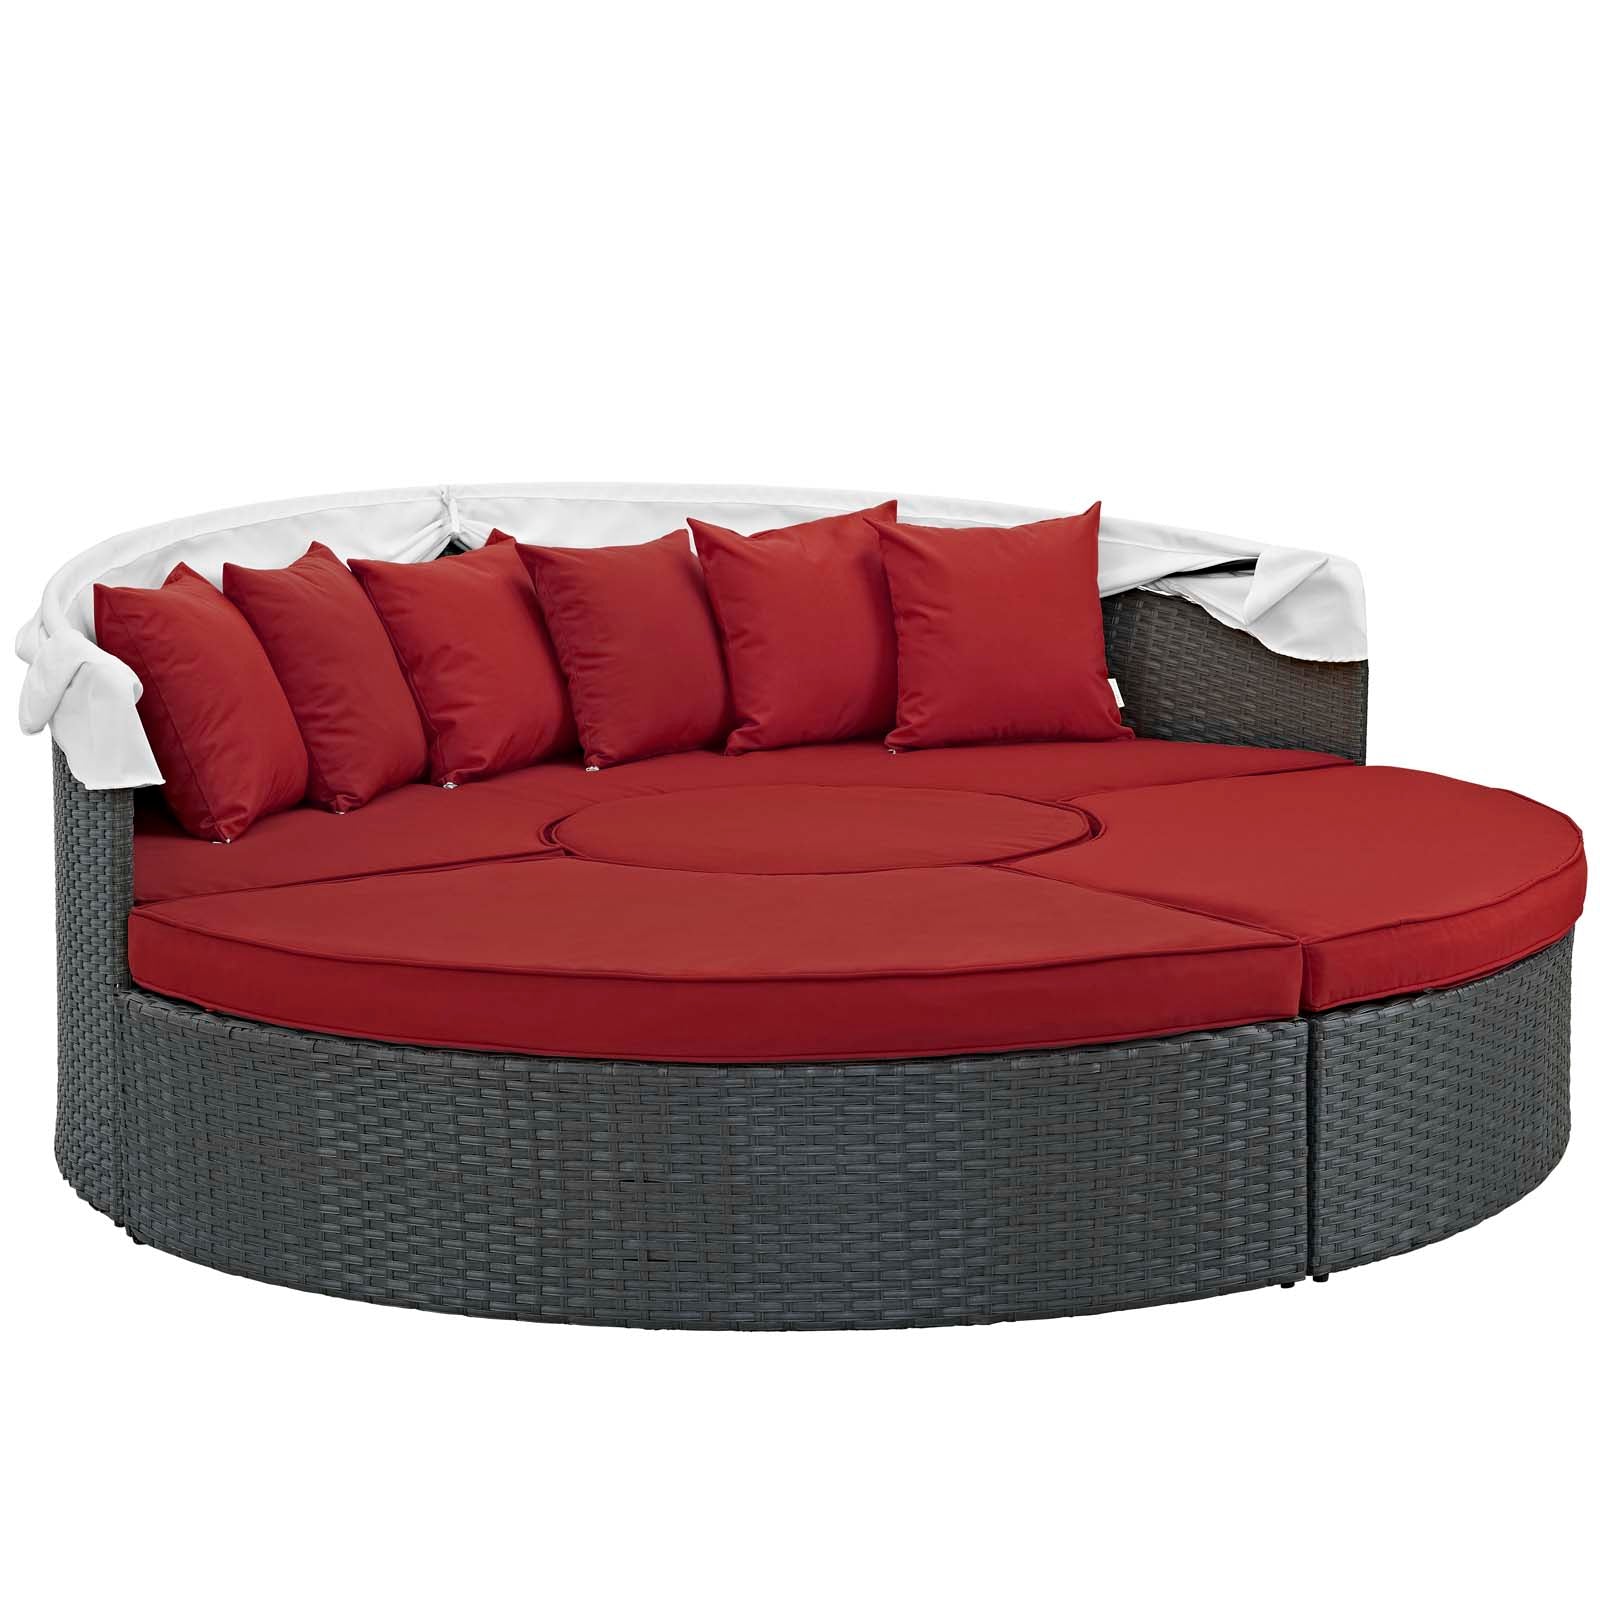 Sojourn Outdoor Patio Sunbrella® Daybed